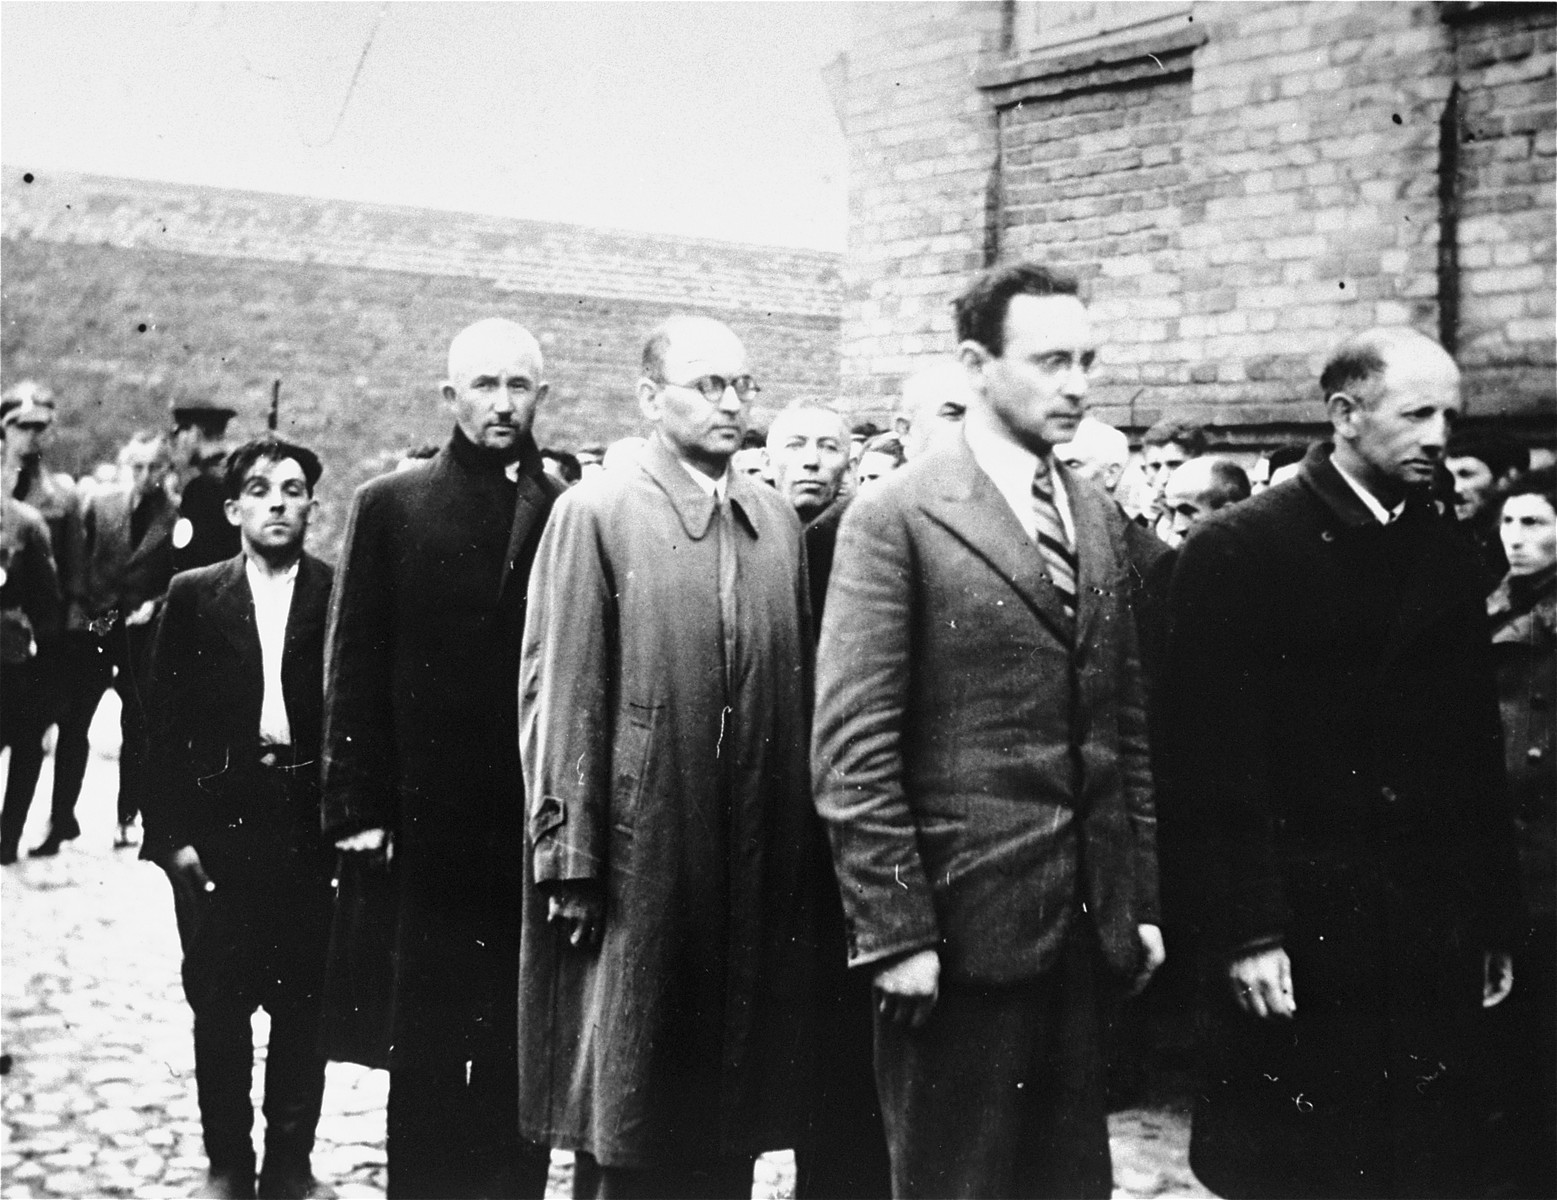 Jewish men are lined-up in a courtyard during an action in Plonsk.